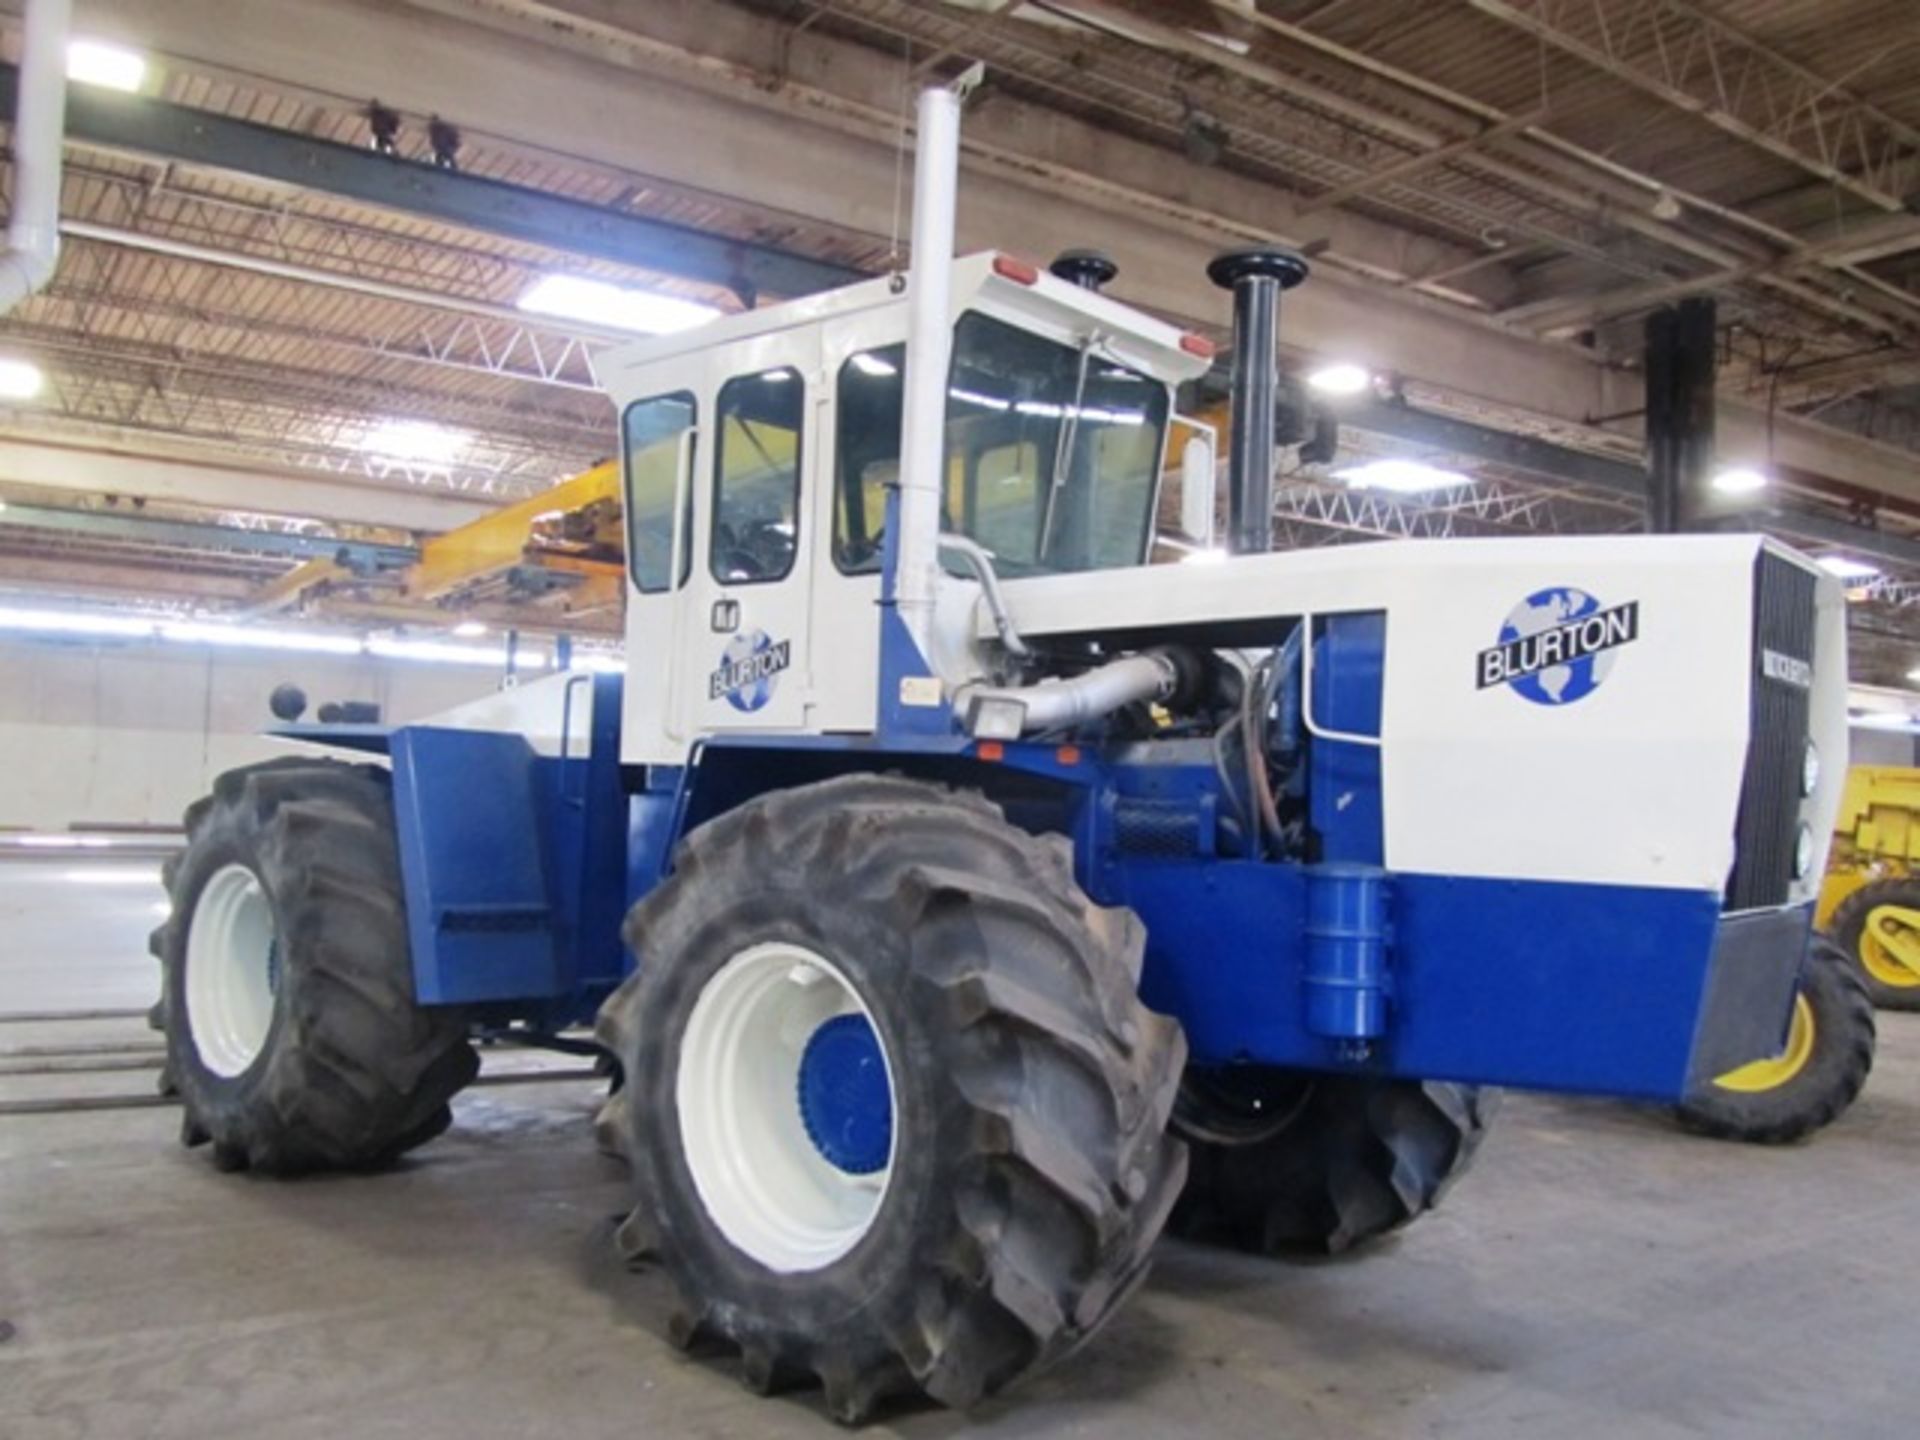 Ford PC311H Rough Terrain Tractor with Articulated Steering, Enclosed Cab, PTO in Rear, Diesel, - Image 2 of 4